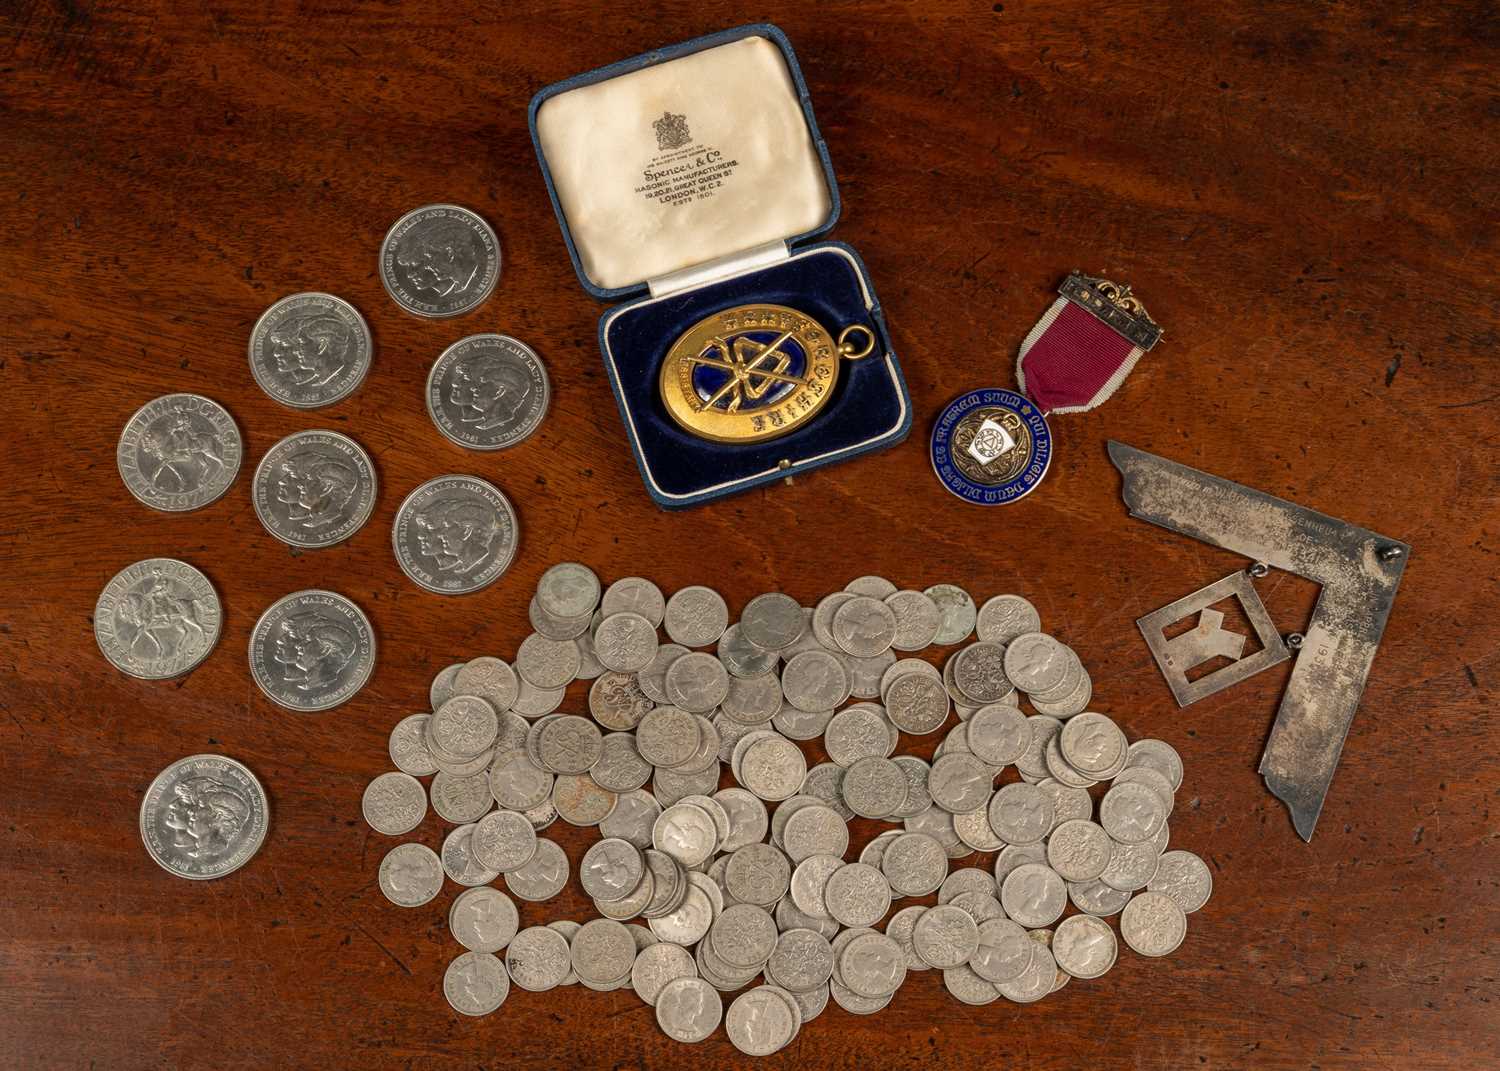 Lot 37 - Three Freemason's medals; seven Diana commemorative coins; two Queen Elizabeth II Silver Jubilee 1977 coins; and other sixpences